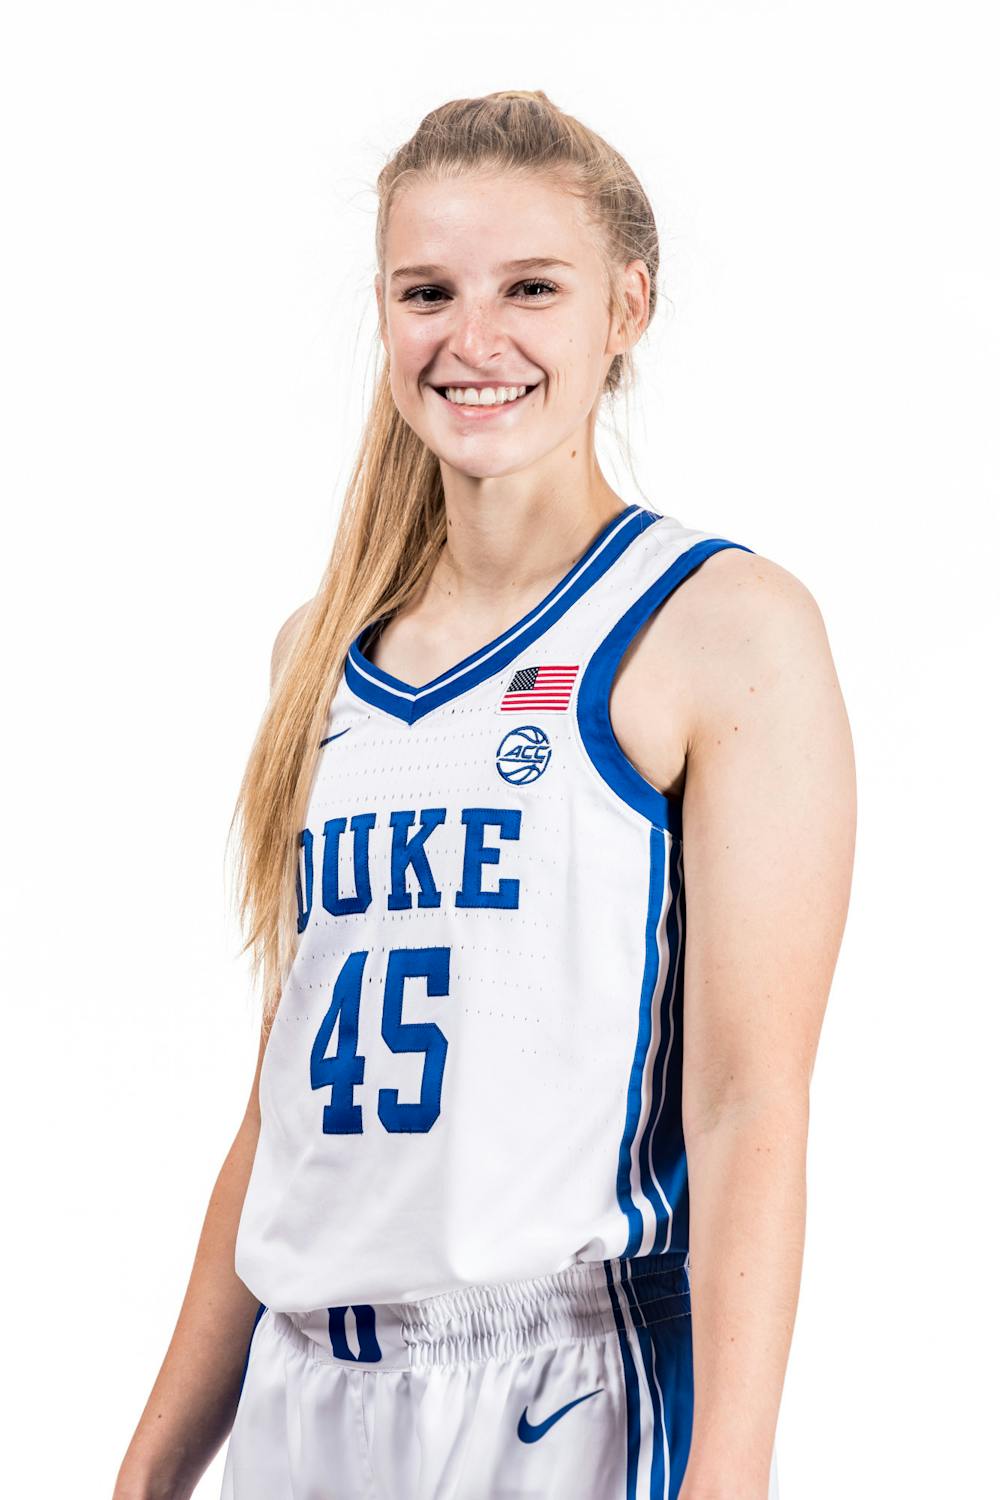 Emma Schmidt debuted for Duke in its 78-35 rout of Charleston Southern last season.